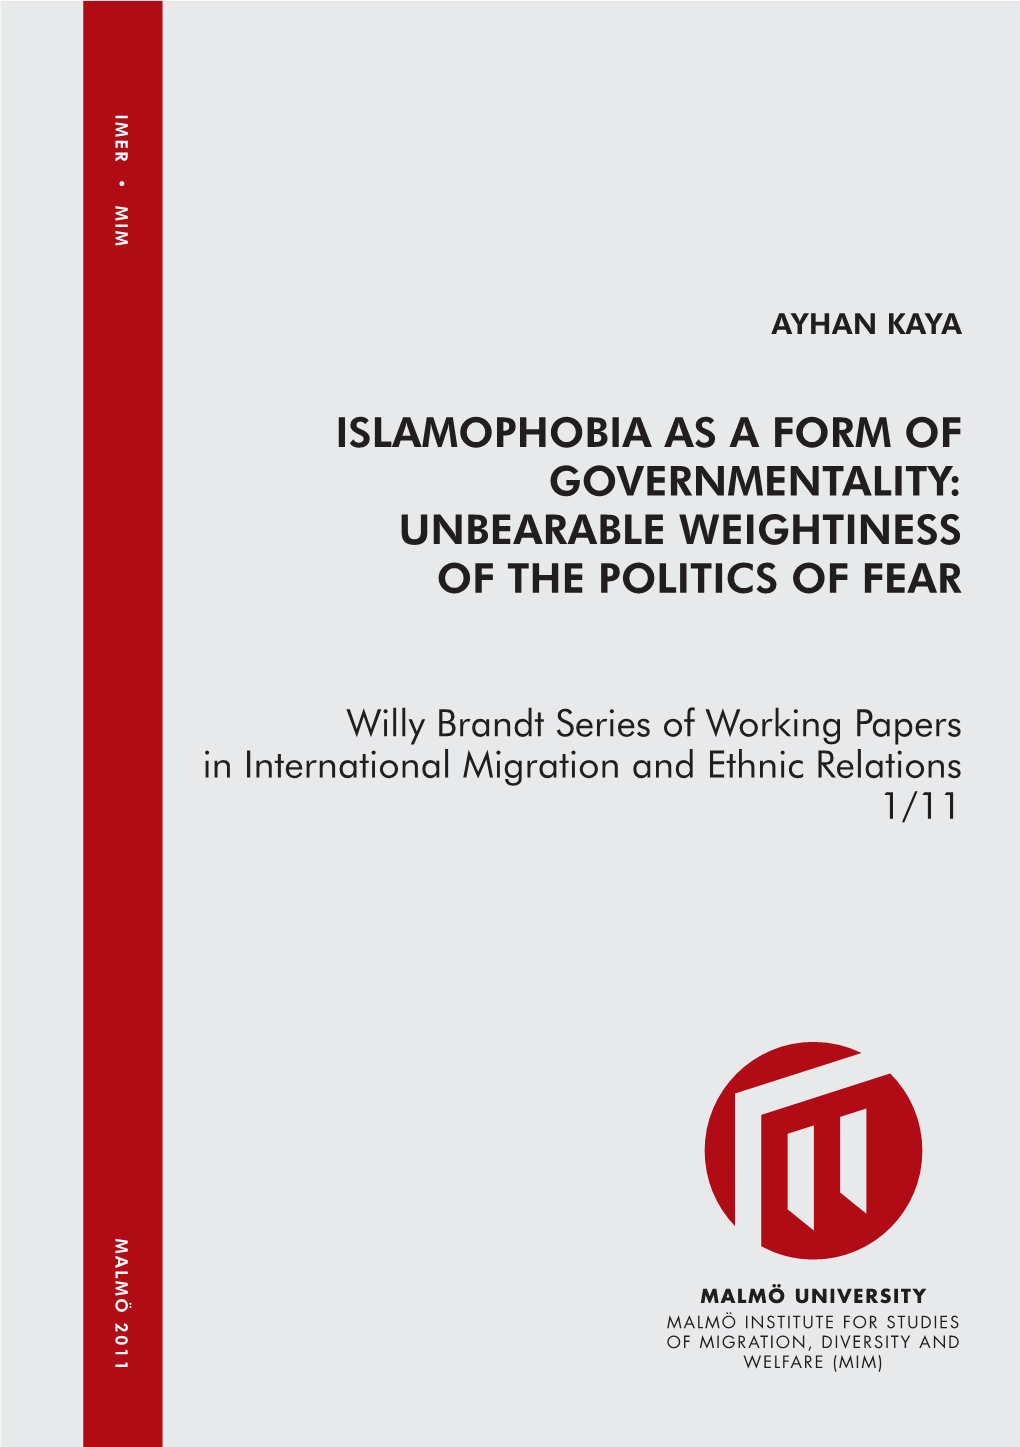 Islamophobia As a Form of Governmentality: Unbearable Weightiness of the Politics of Fear